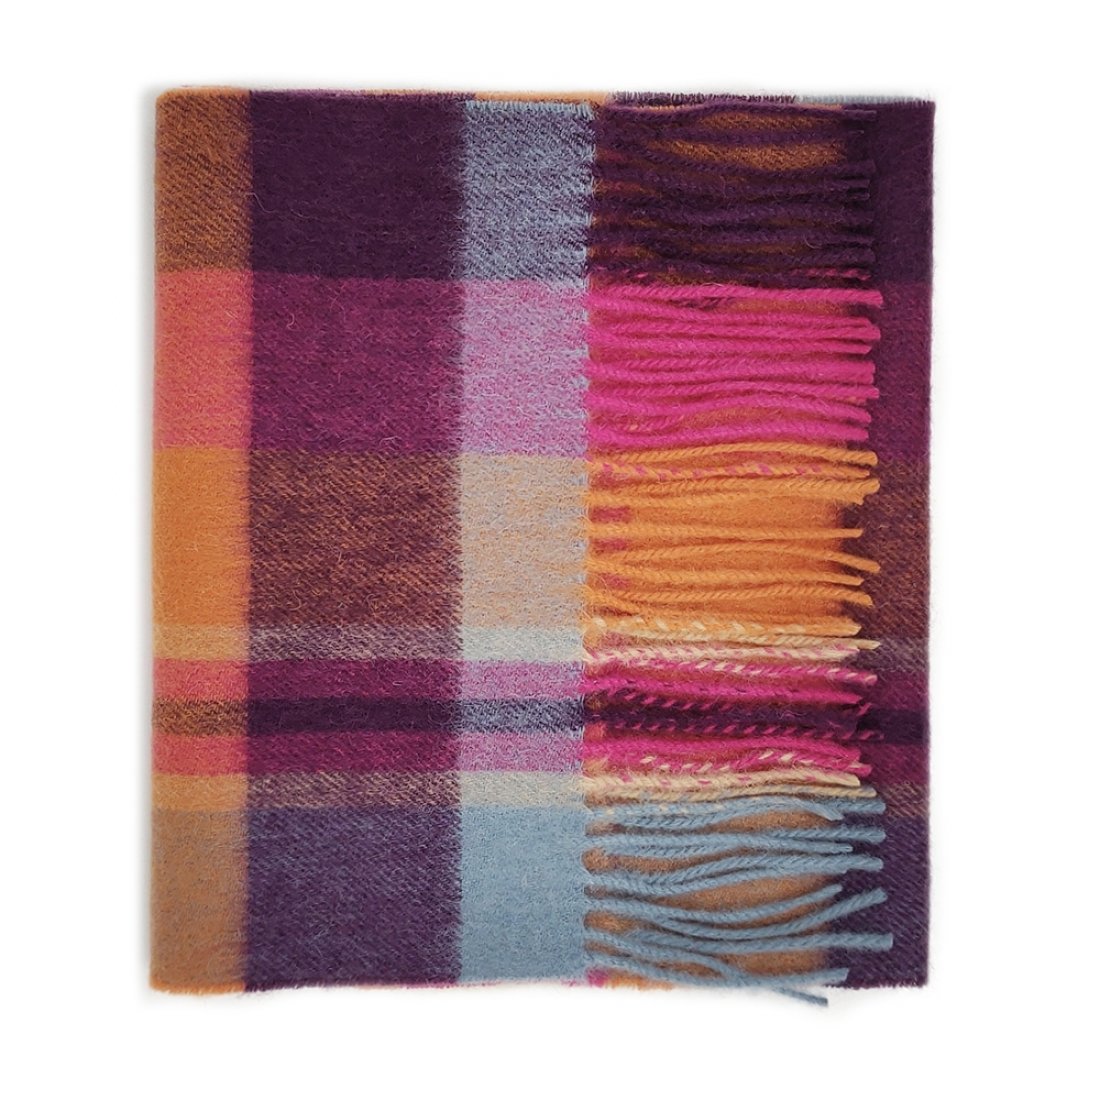 100% Cashmere Scarf - Orient Ginger New Square Check